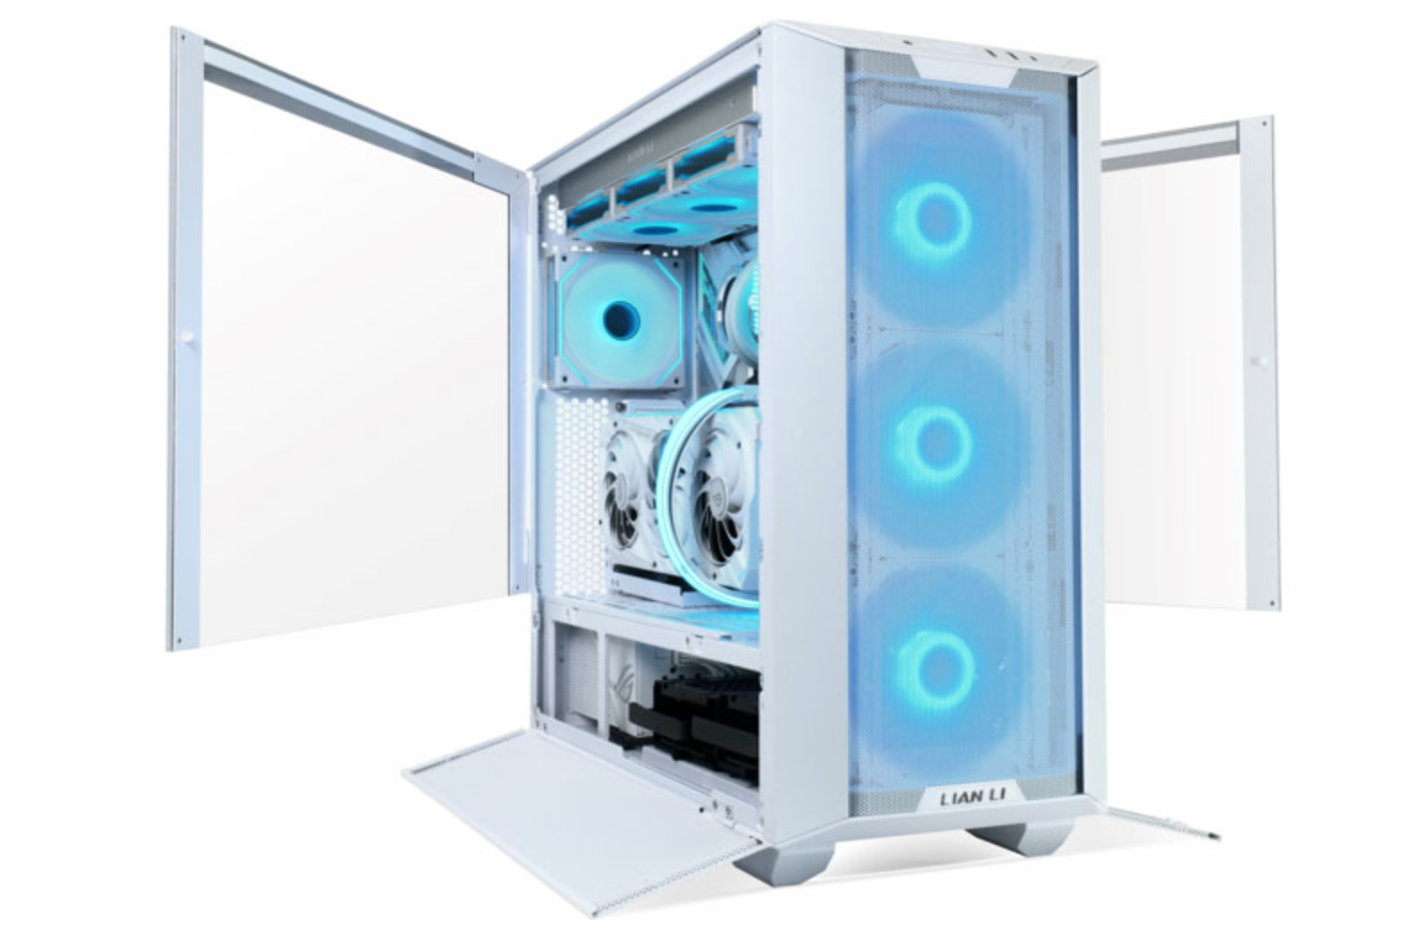 Building a new PC - how to pick the right case